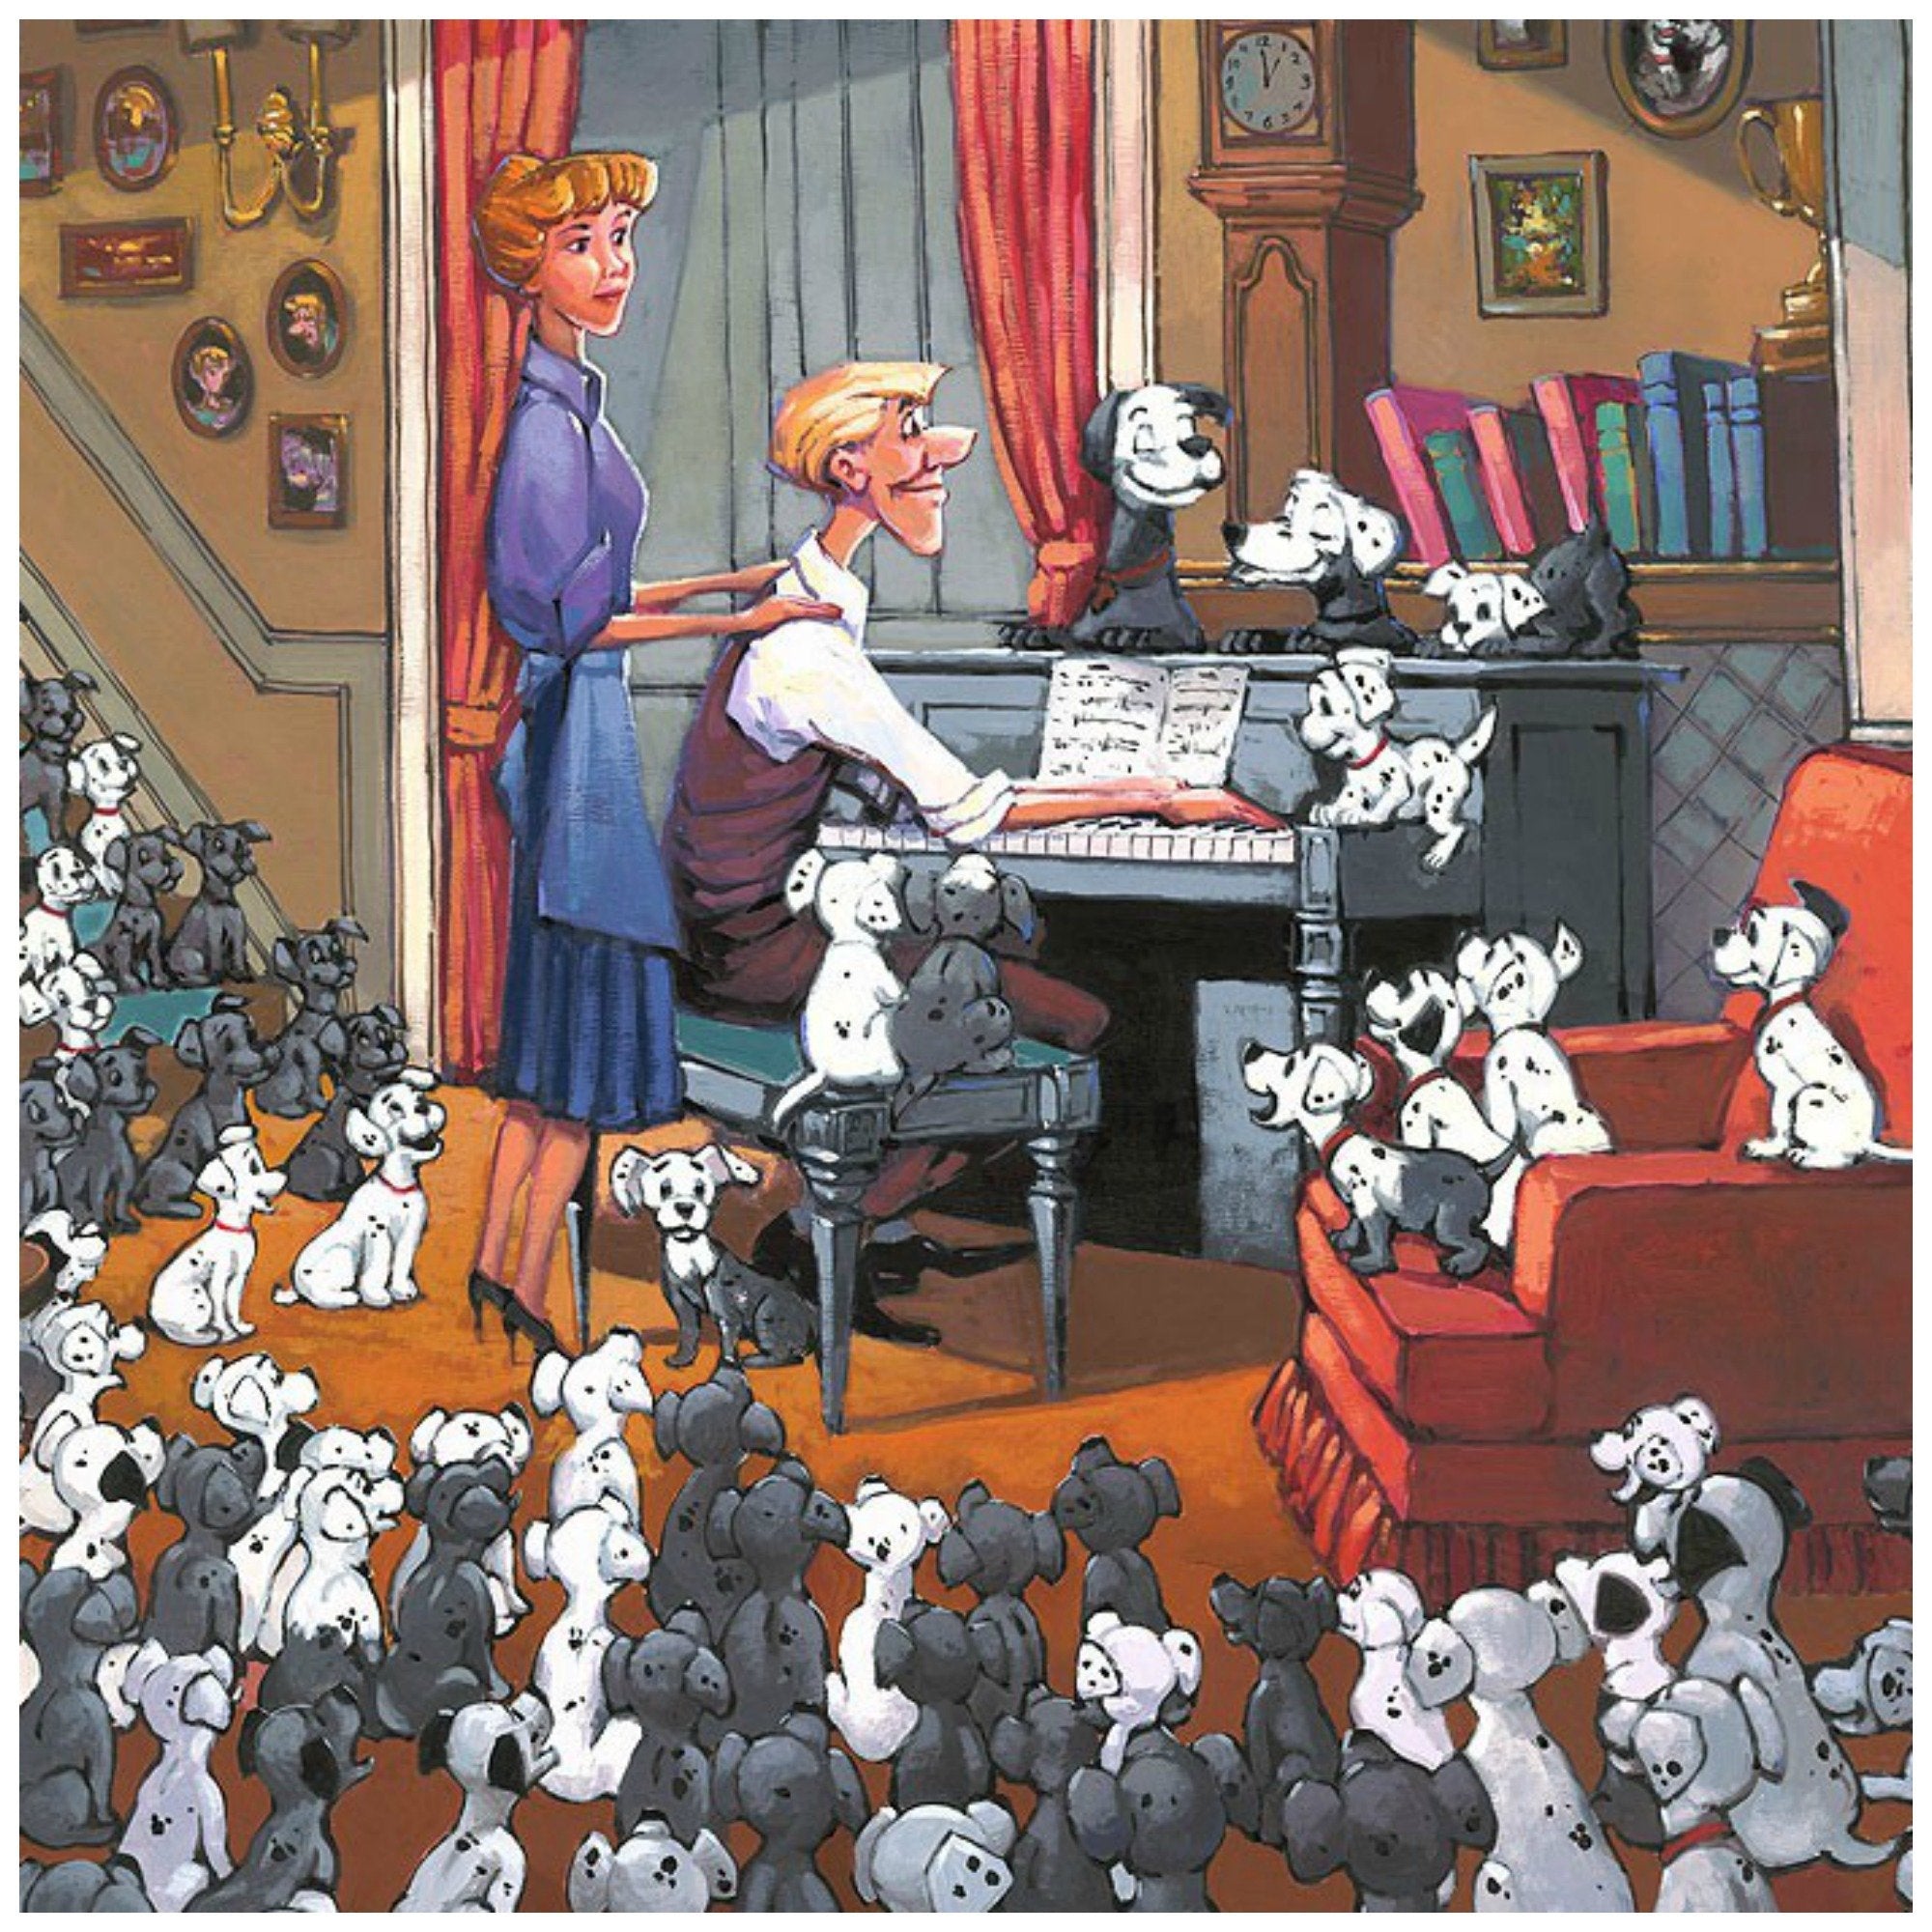  Family Gathering by Rodel Gonzalez.  Perdy and Pongo and their pups gathered quietly around Roger as he plays the piano, with Anita showing support - closeup.